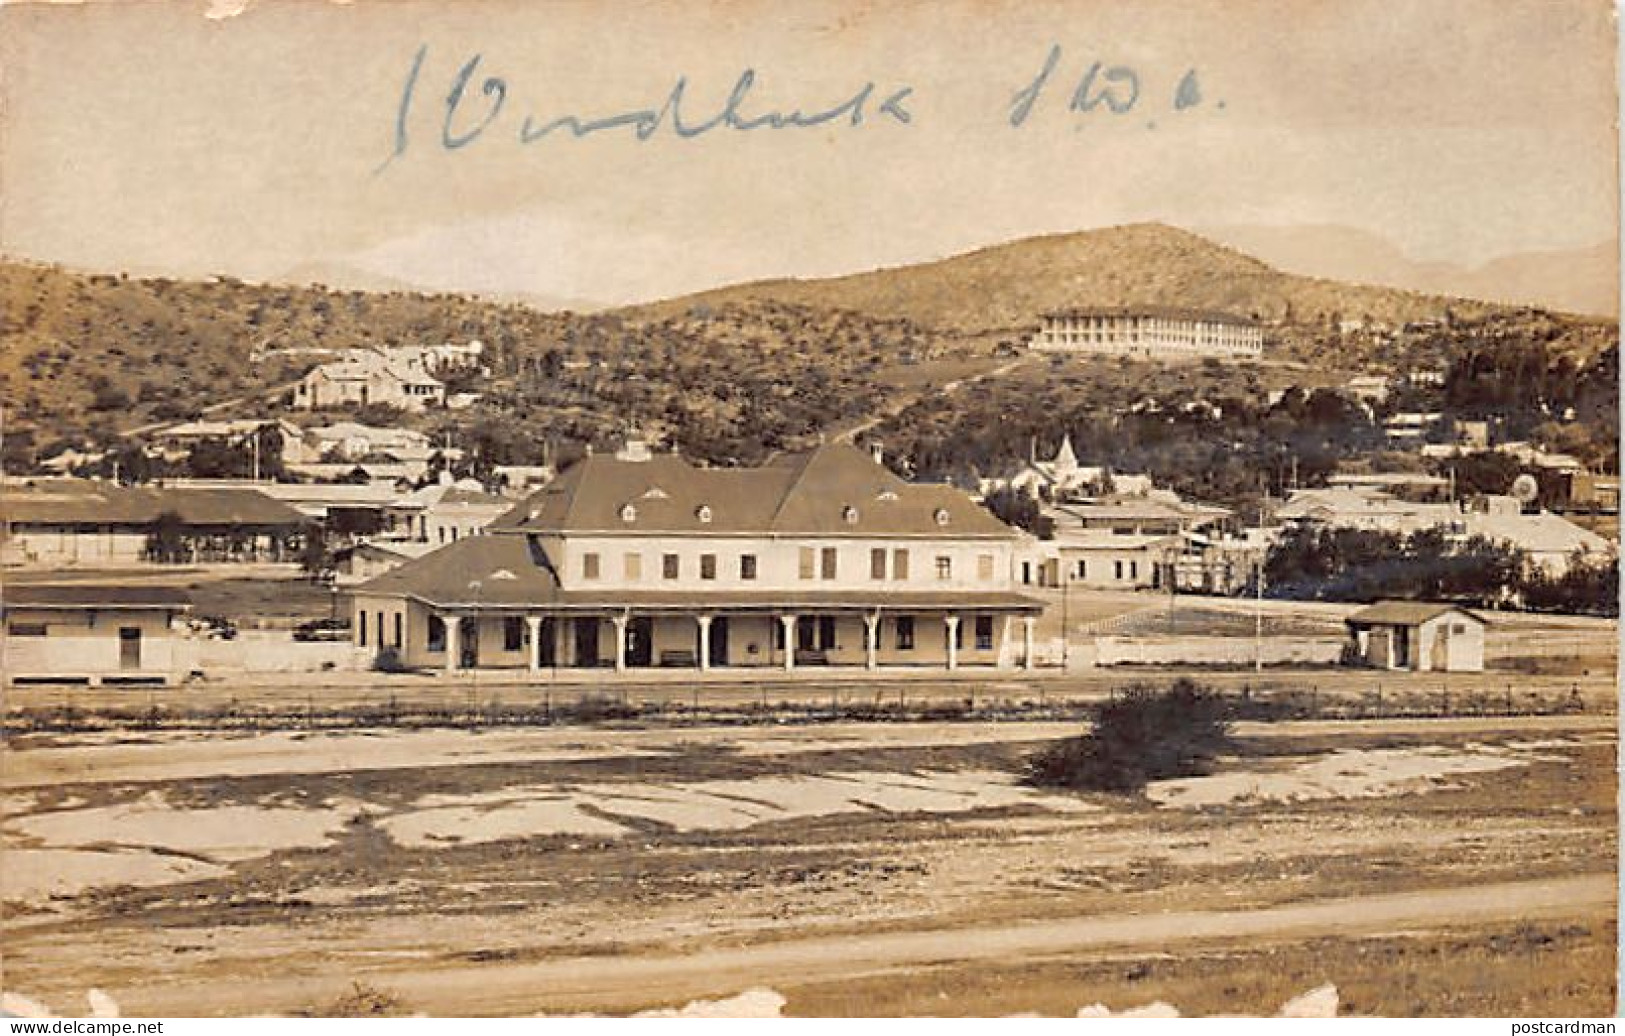 Namibia - WINDHOEK Windhuk - The Railway Station - REAL PHOTO - Publ. Unknown  - Namibia